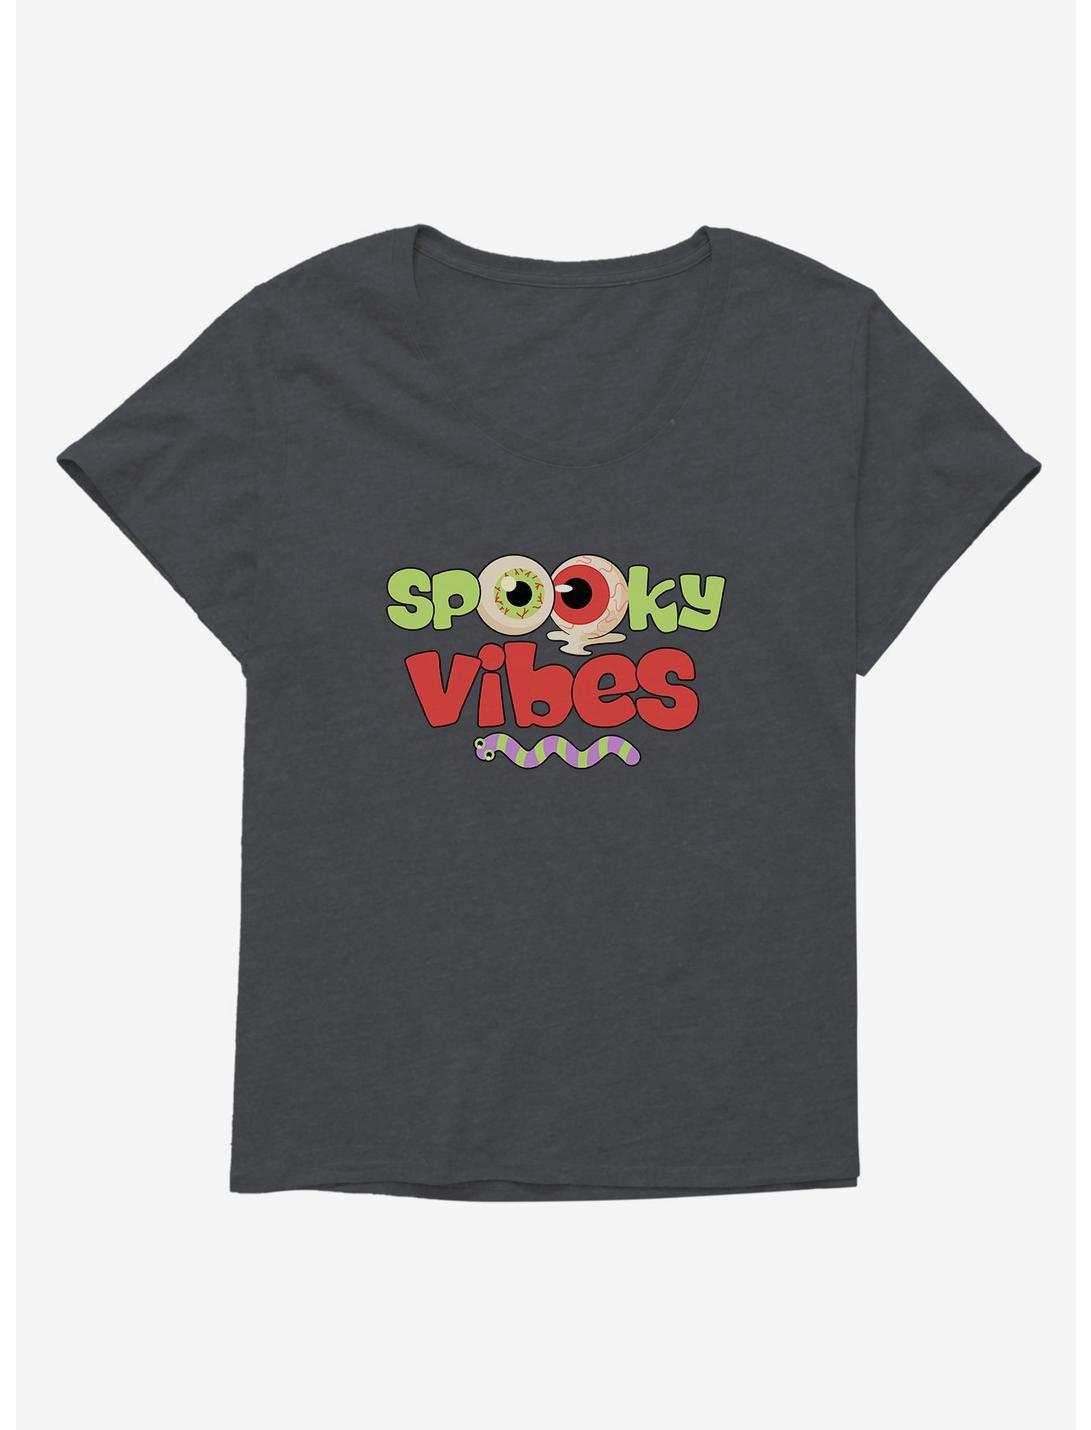 Halloween Spooky Vibes Girls Plus Size T-Shirt, CHARCOAL HEATHER, hi-res